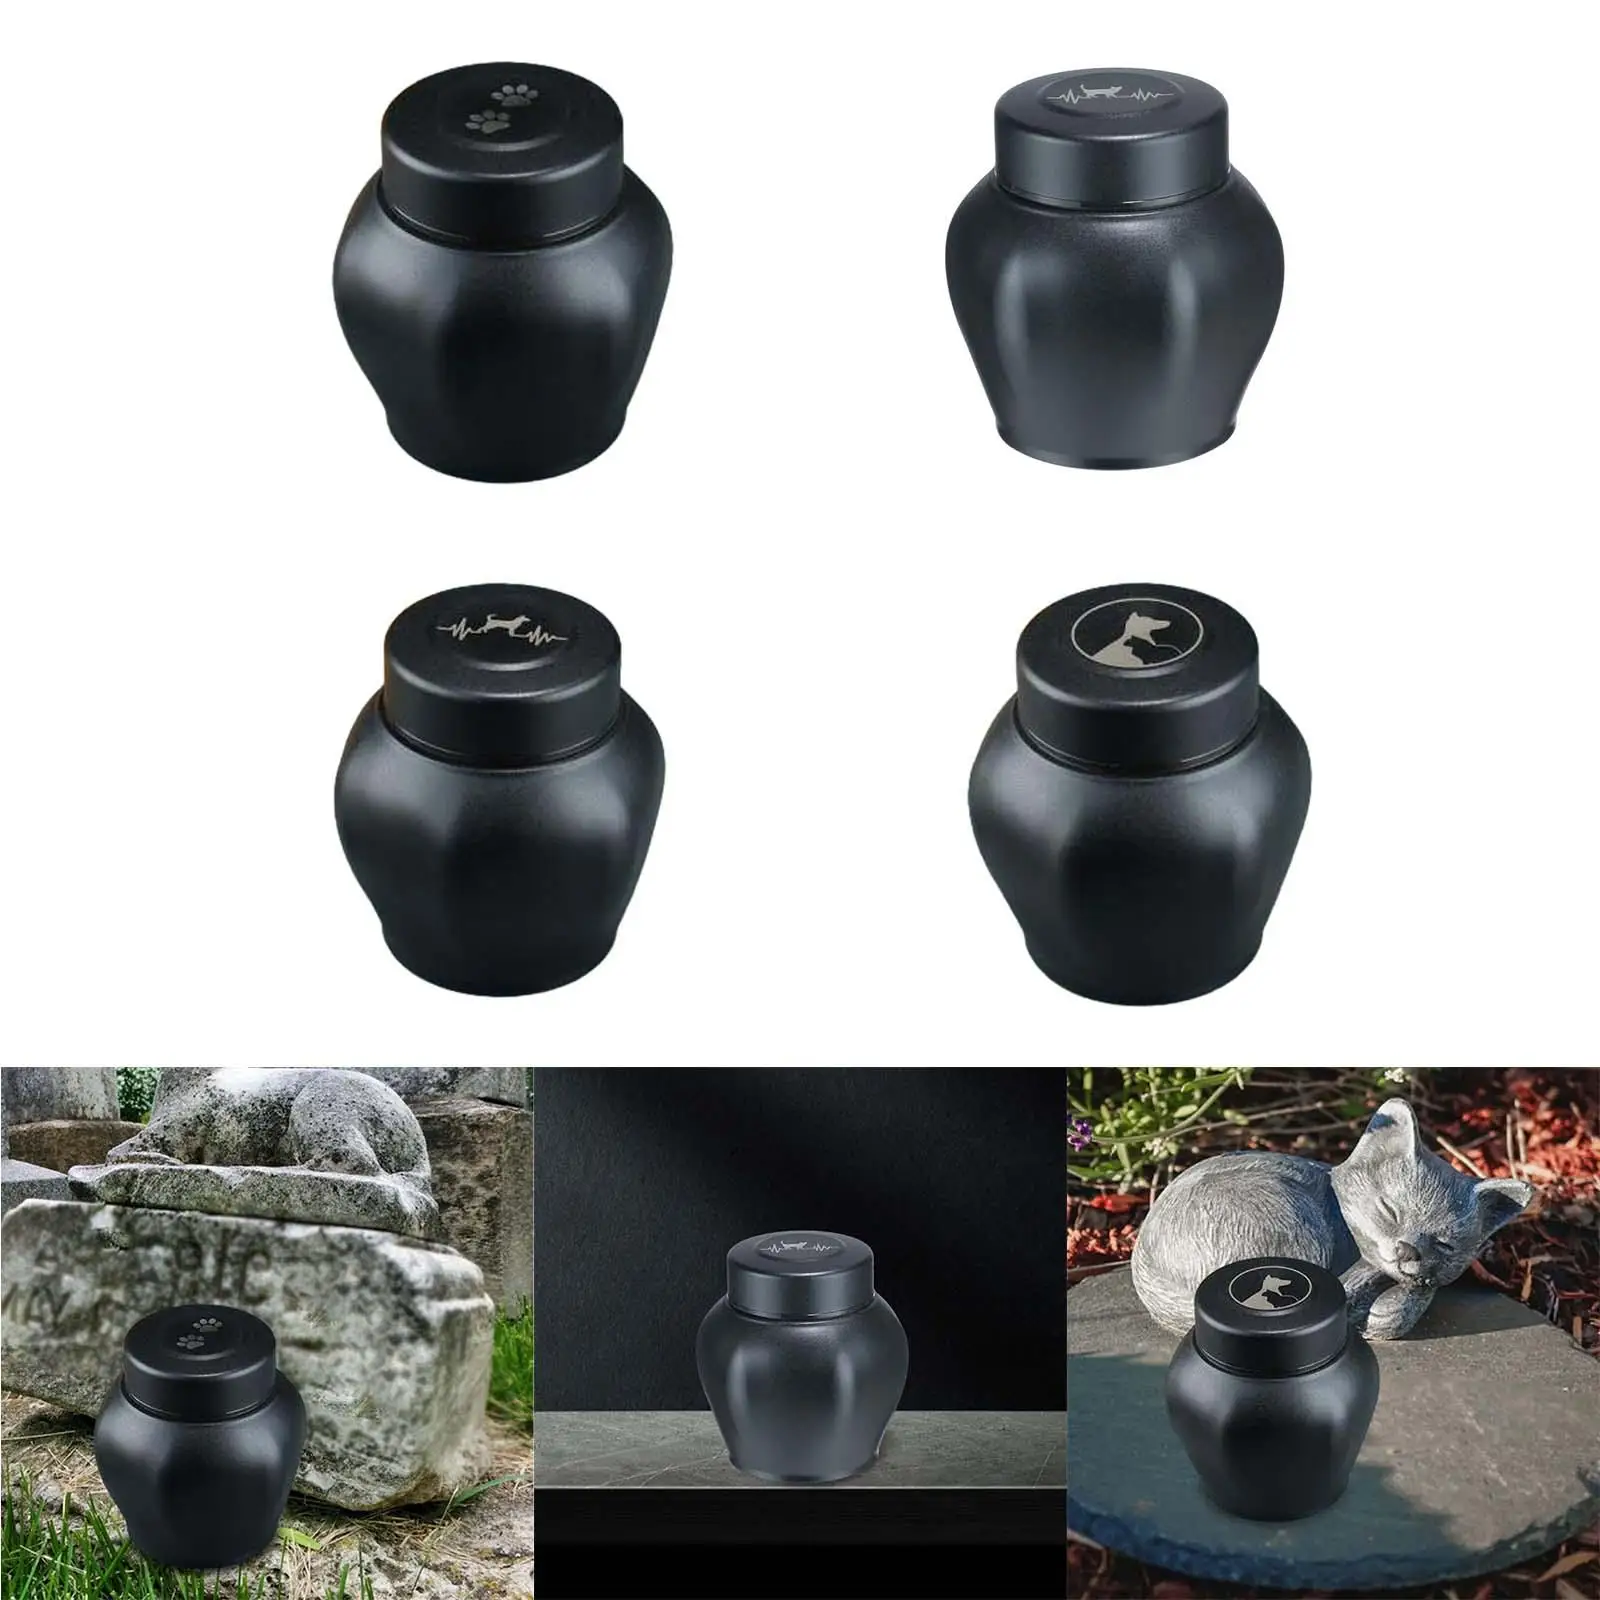 Cat Ash Holder, Memorial Keepsake Urns, Stainless Steel, Cremation Urn Pet Ash Urn for Puppy, Dogs, Cats